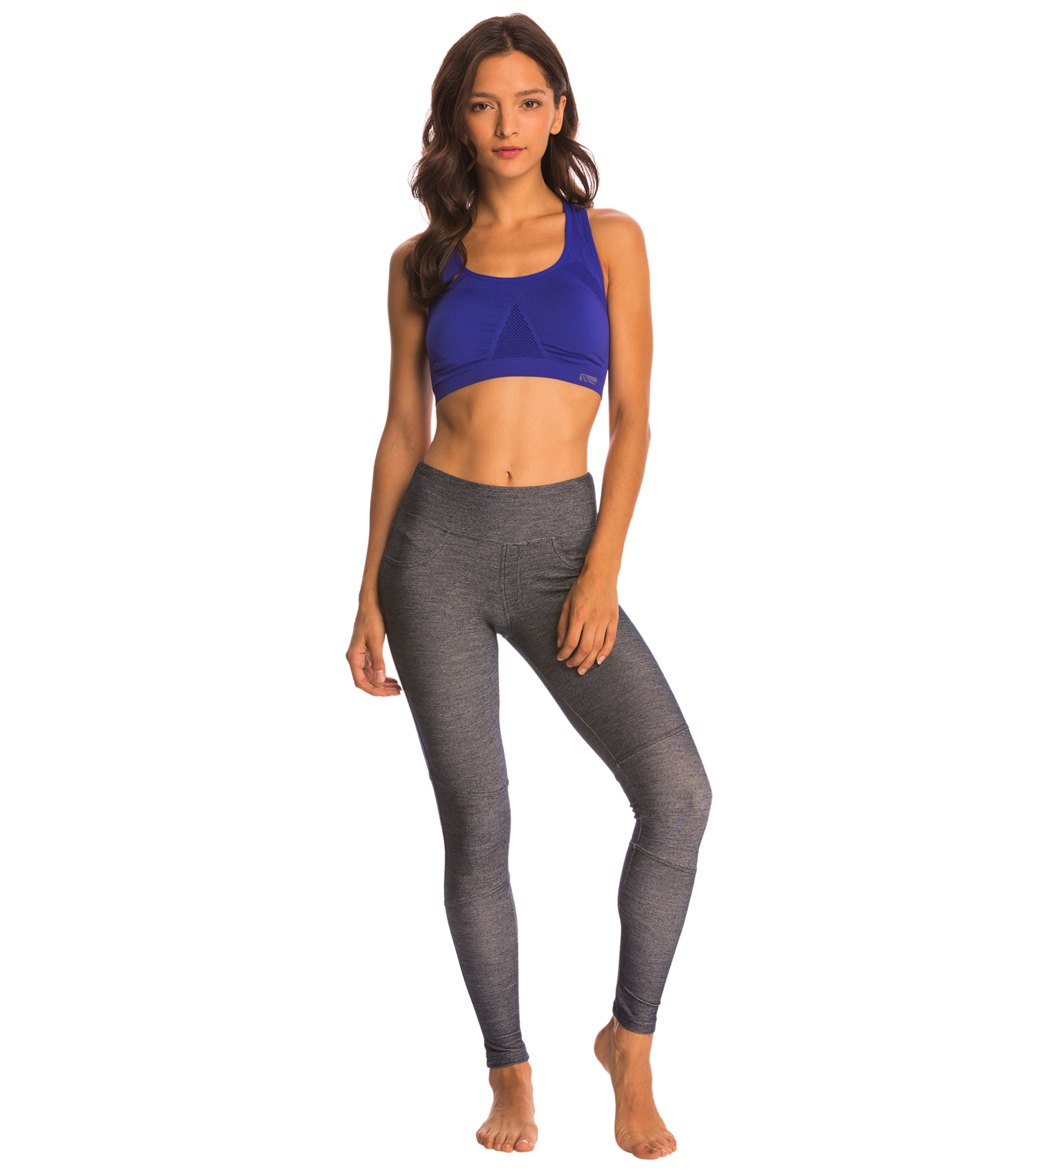 Just In: Marika & Balance Collection - Everyday Yoga